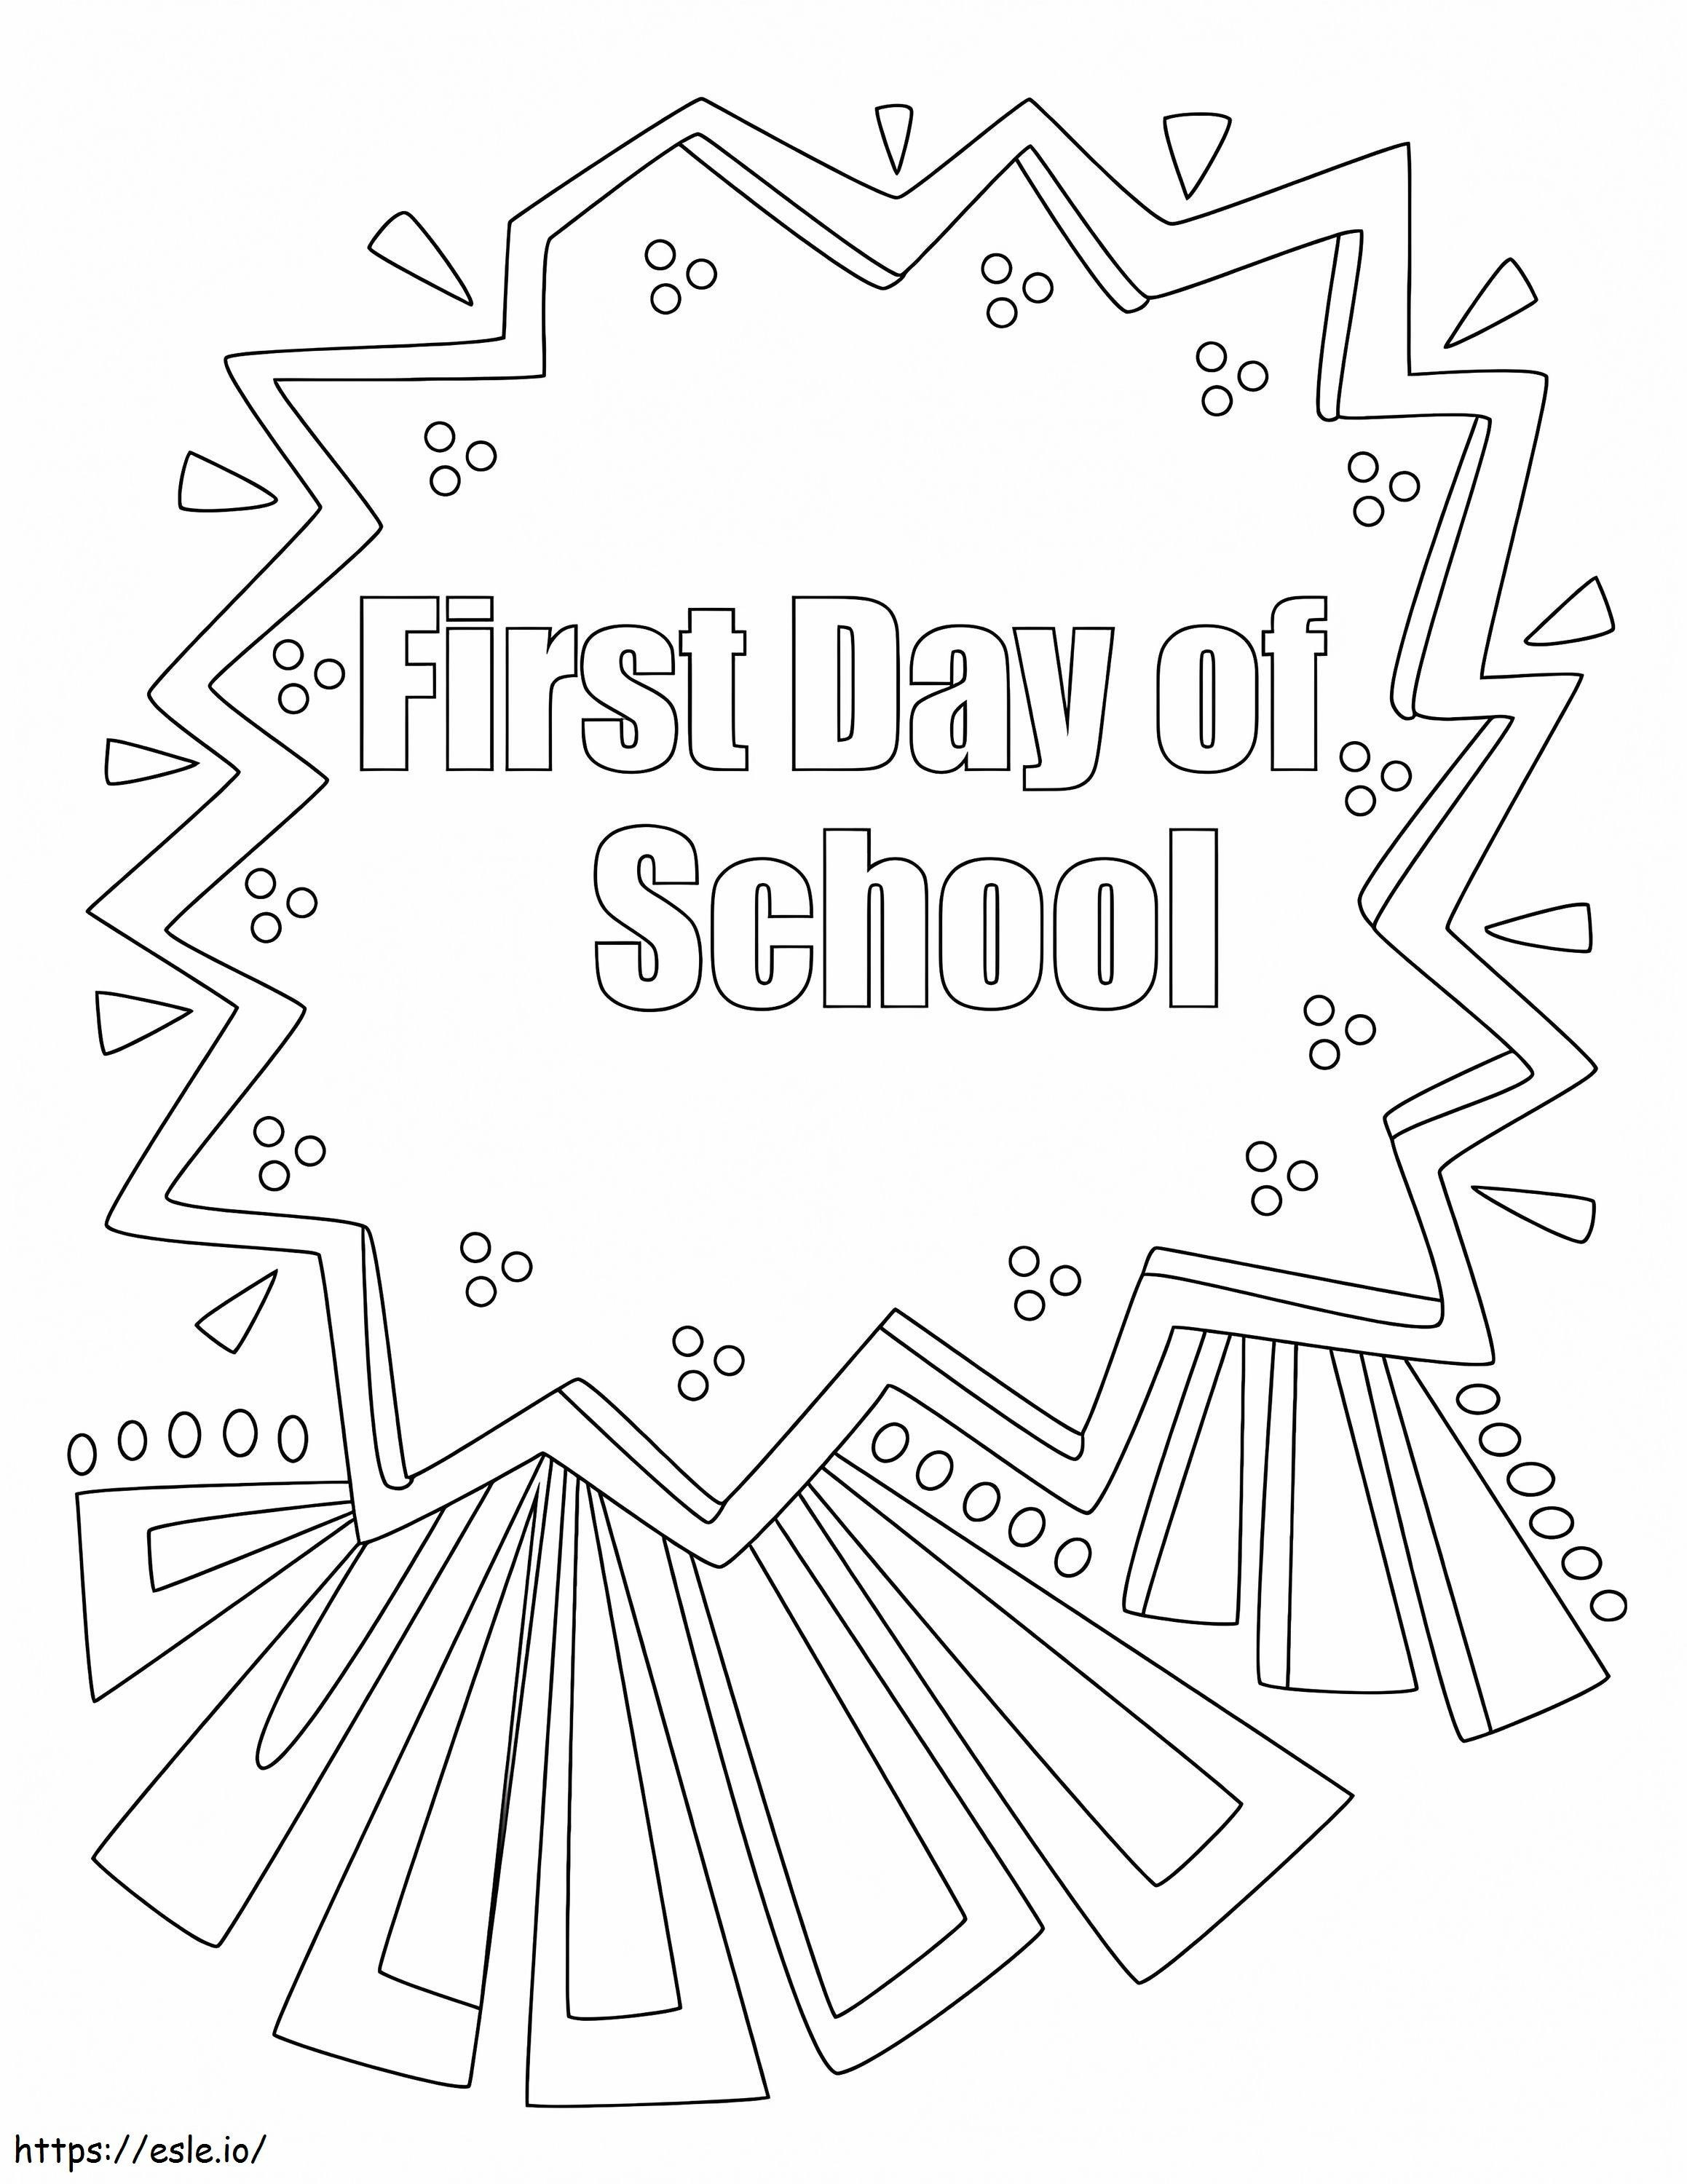 First Day Of School To Color coloring page